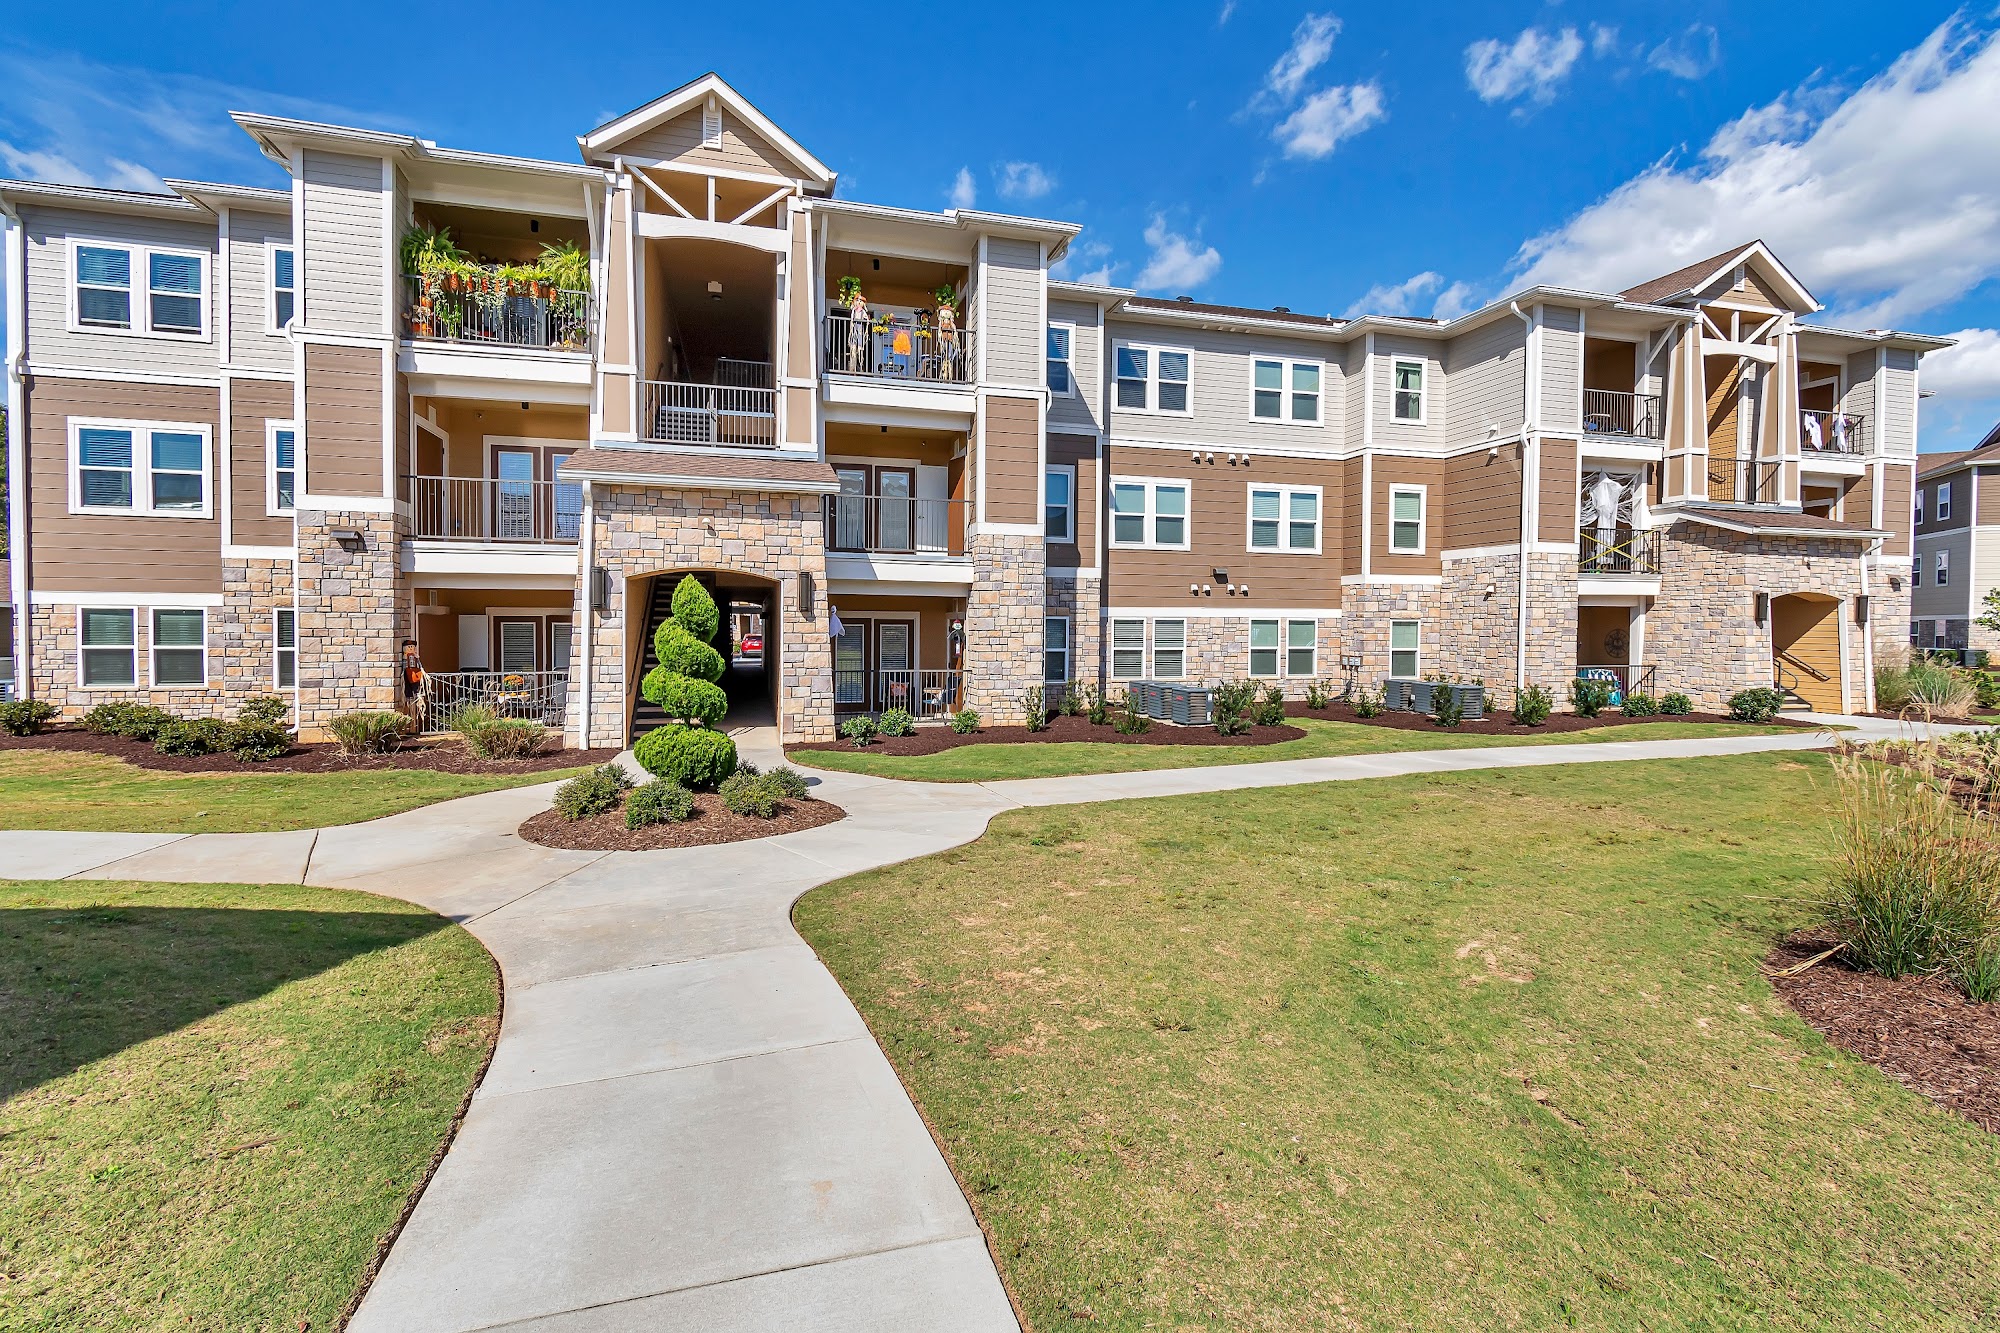 Pointe at Greenville Apartments